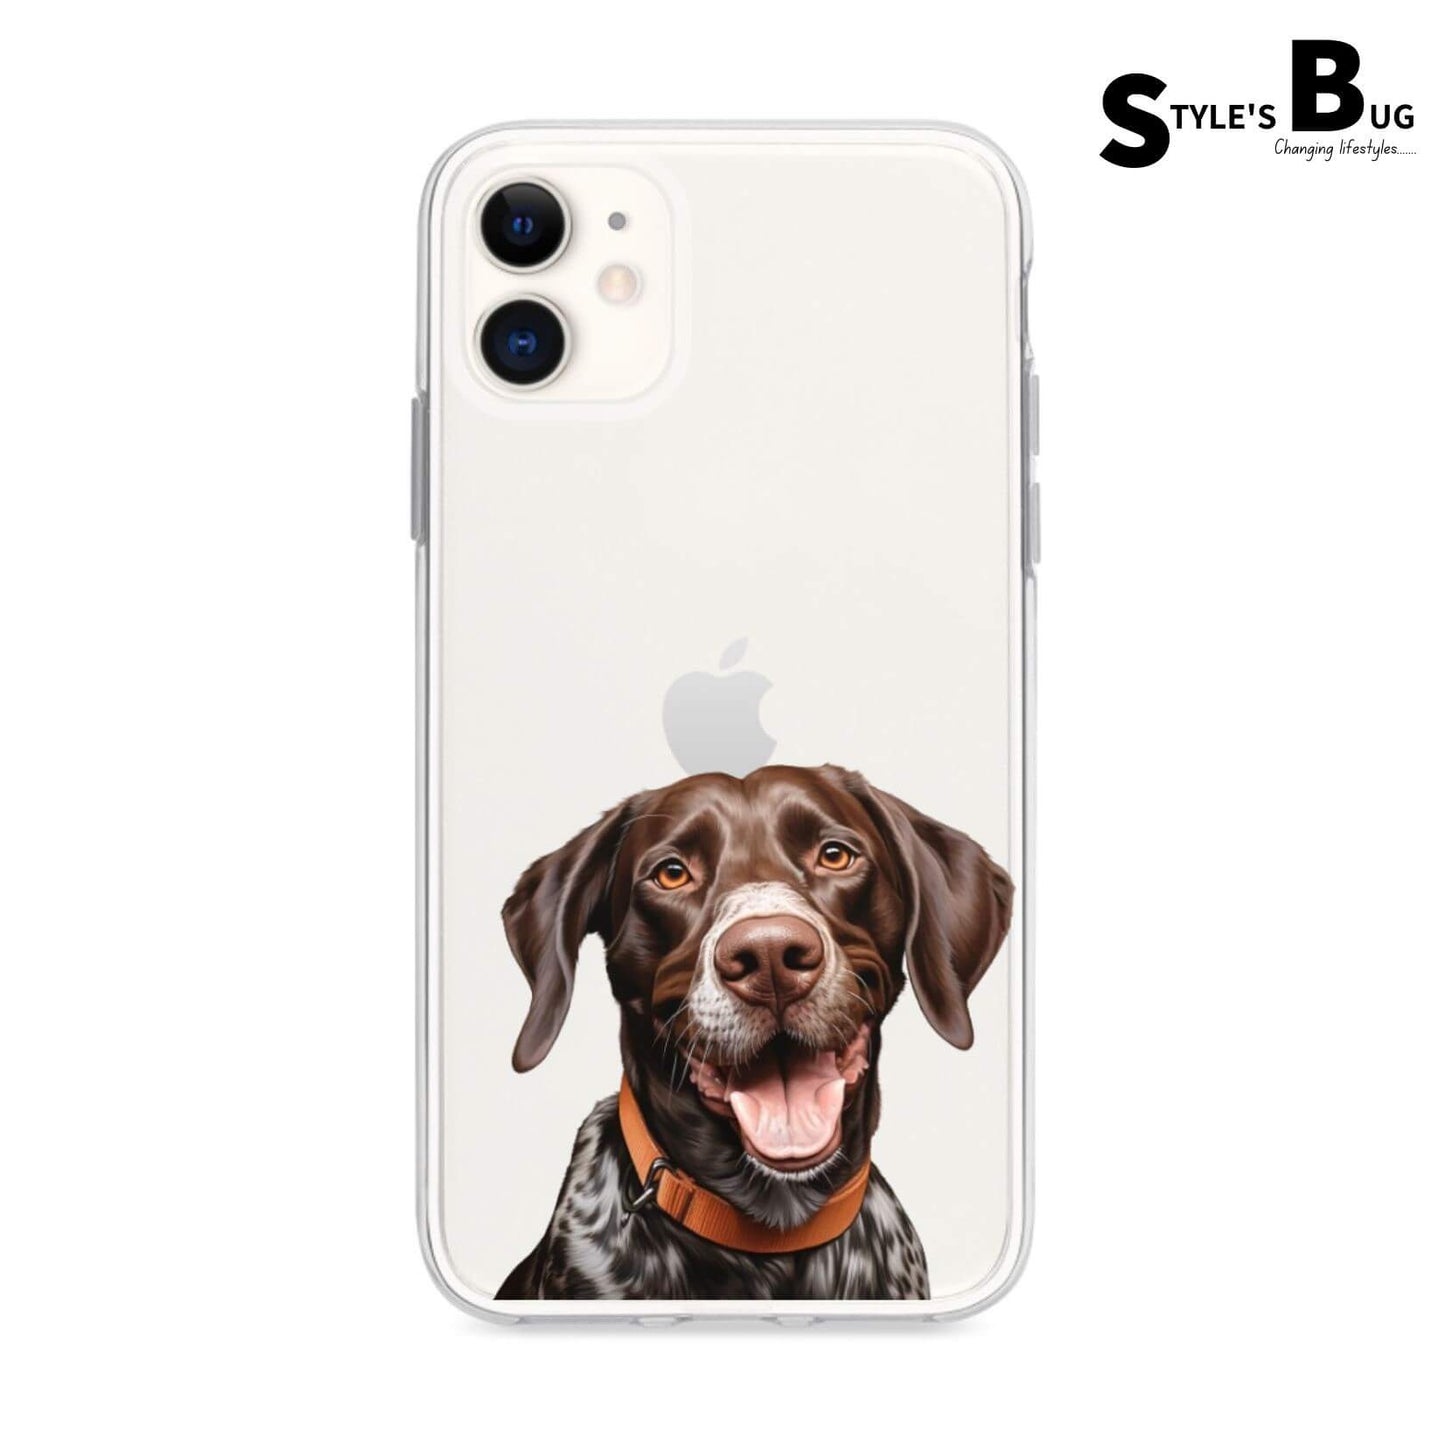 Smiling Dog phone cases from Style's Bug (UV printed) - Style's Bug GSP